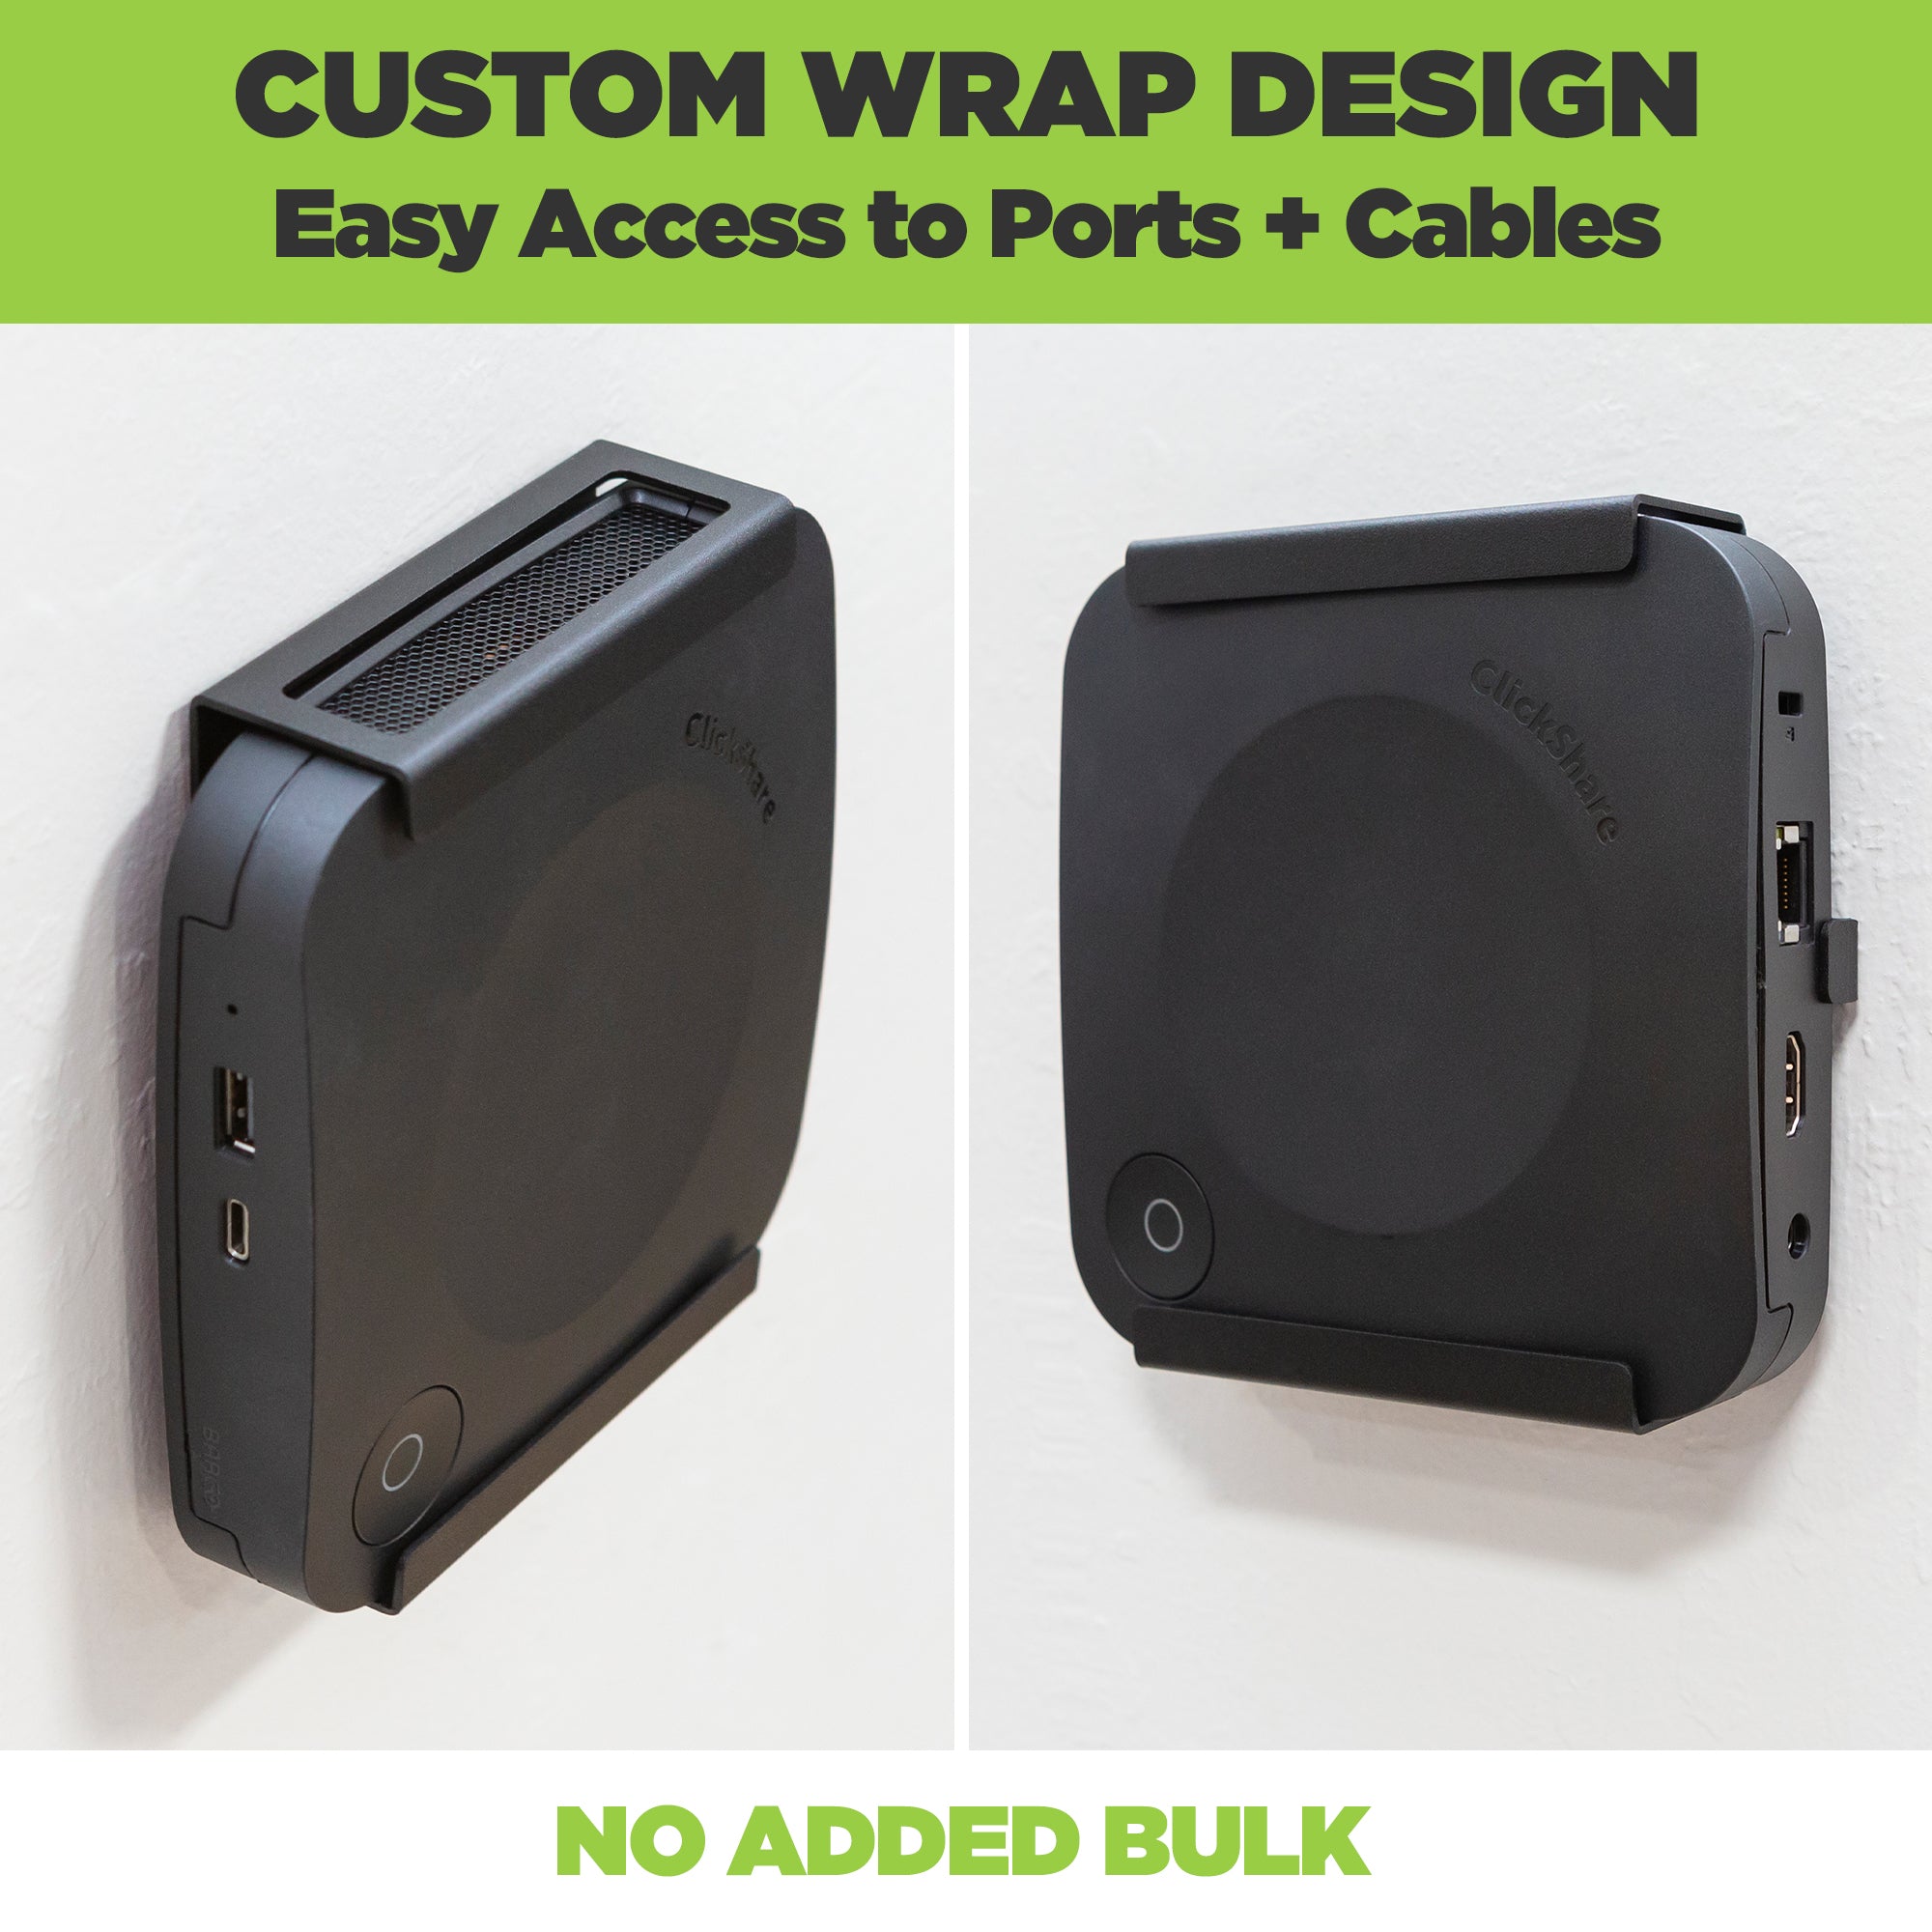 The custom wrap design of the HIDEit Barco CX-20 Wall Mount perfectly holds the Barco ClickShare wireless presentation system without adding bulk to the Barco Device.